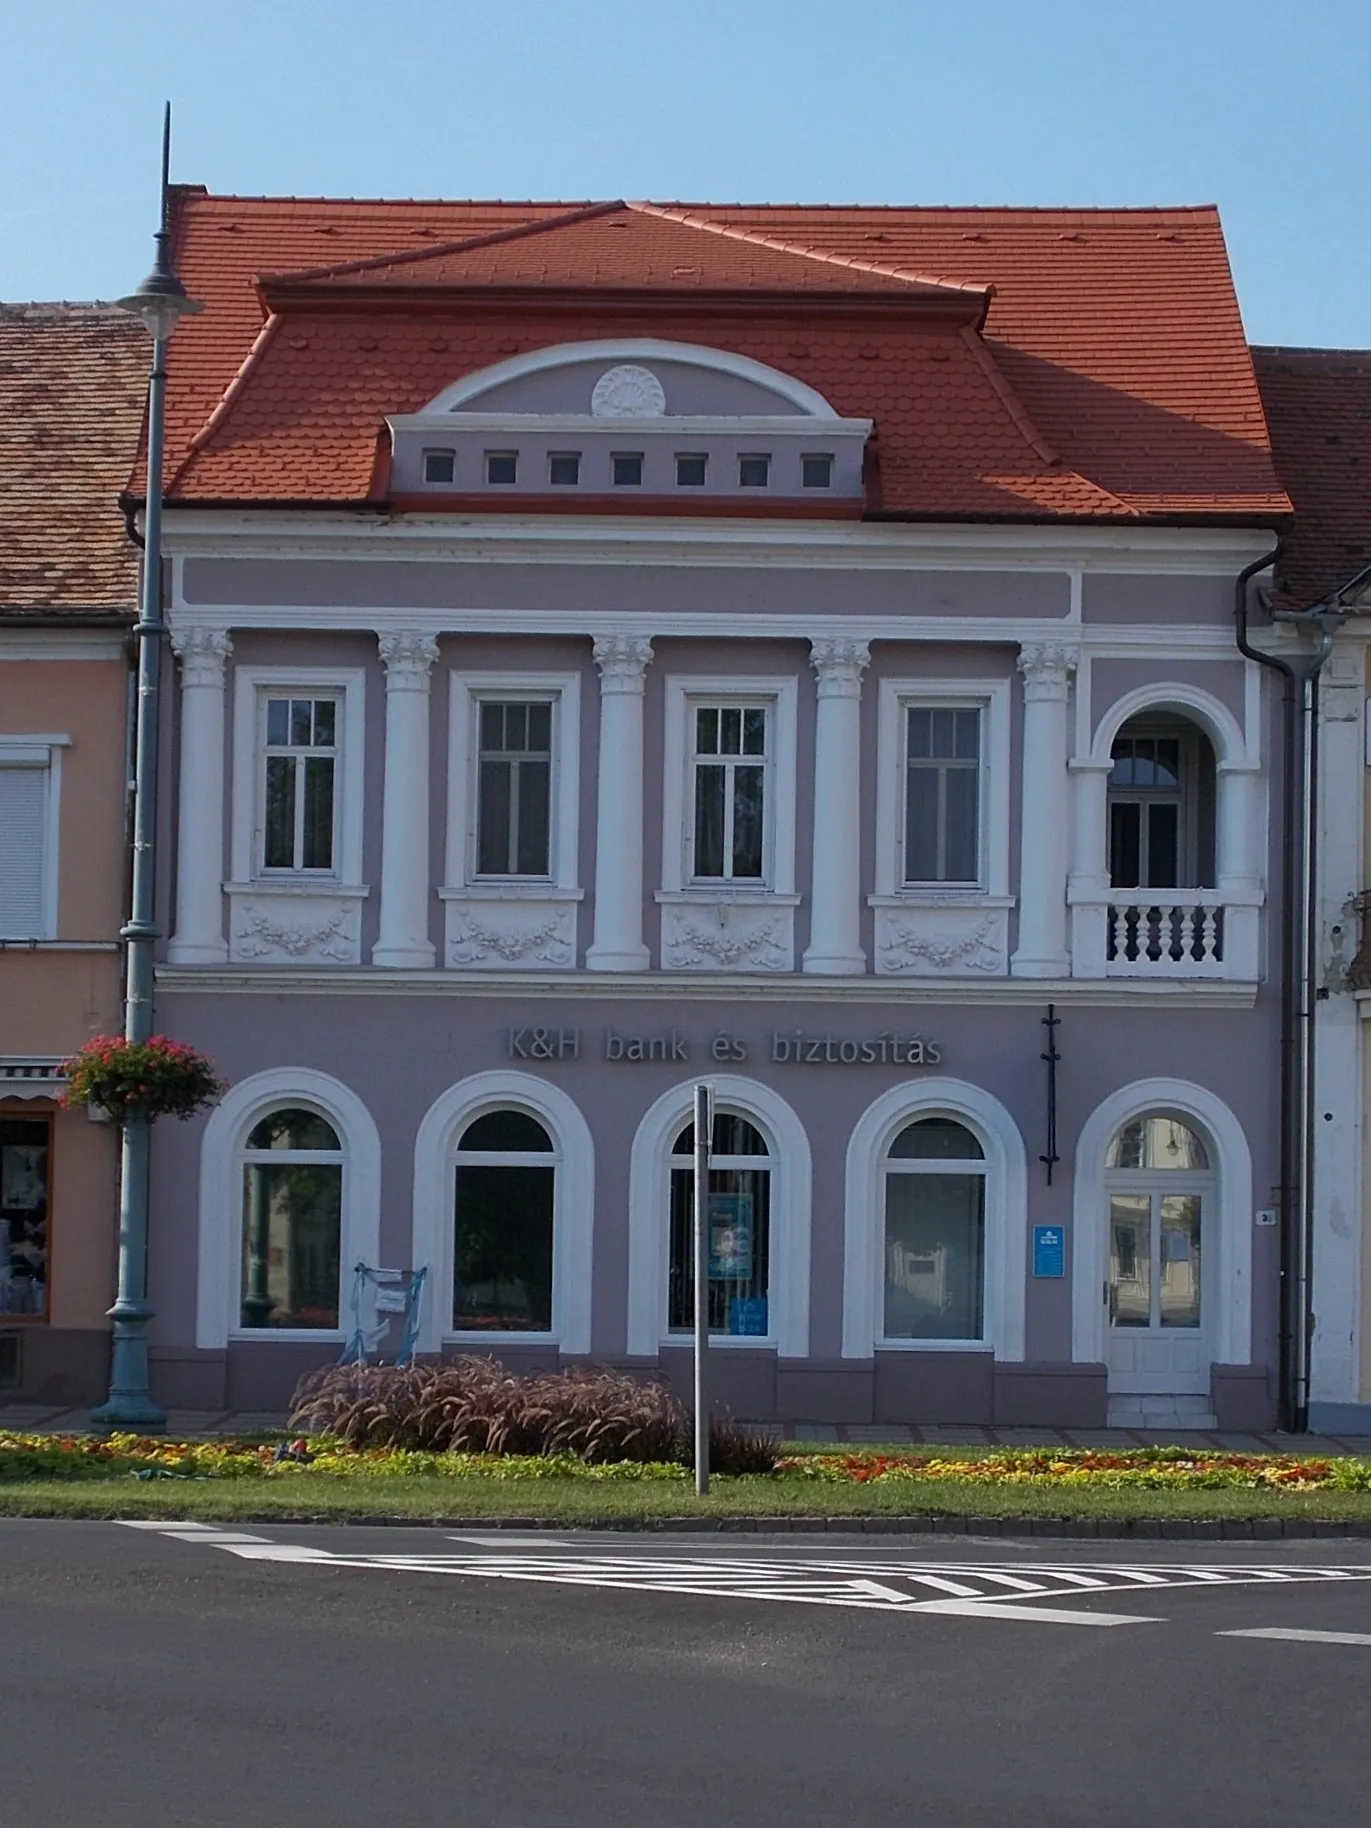 Photo showing: : Former Magyar (Hungarian) Fashion Store building, now K&H bank customer point - automated cash flow branch. - 3 Batthyány Street, Sárvár, Vas County, Hungary.